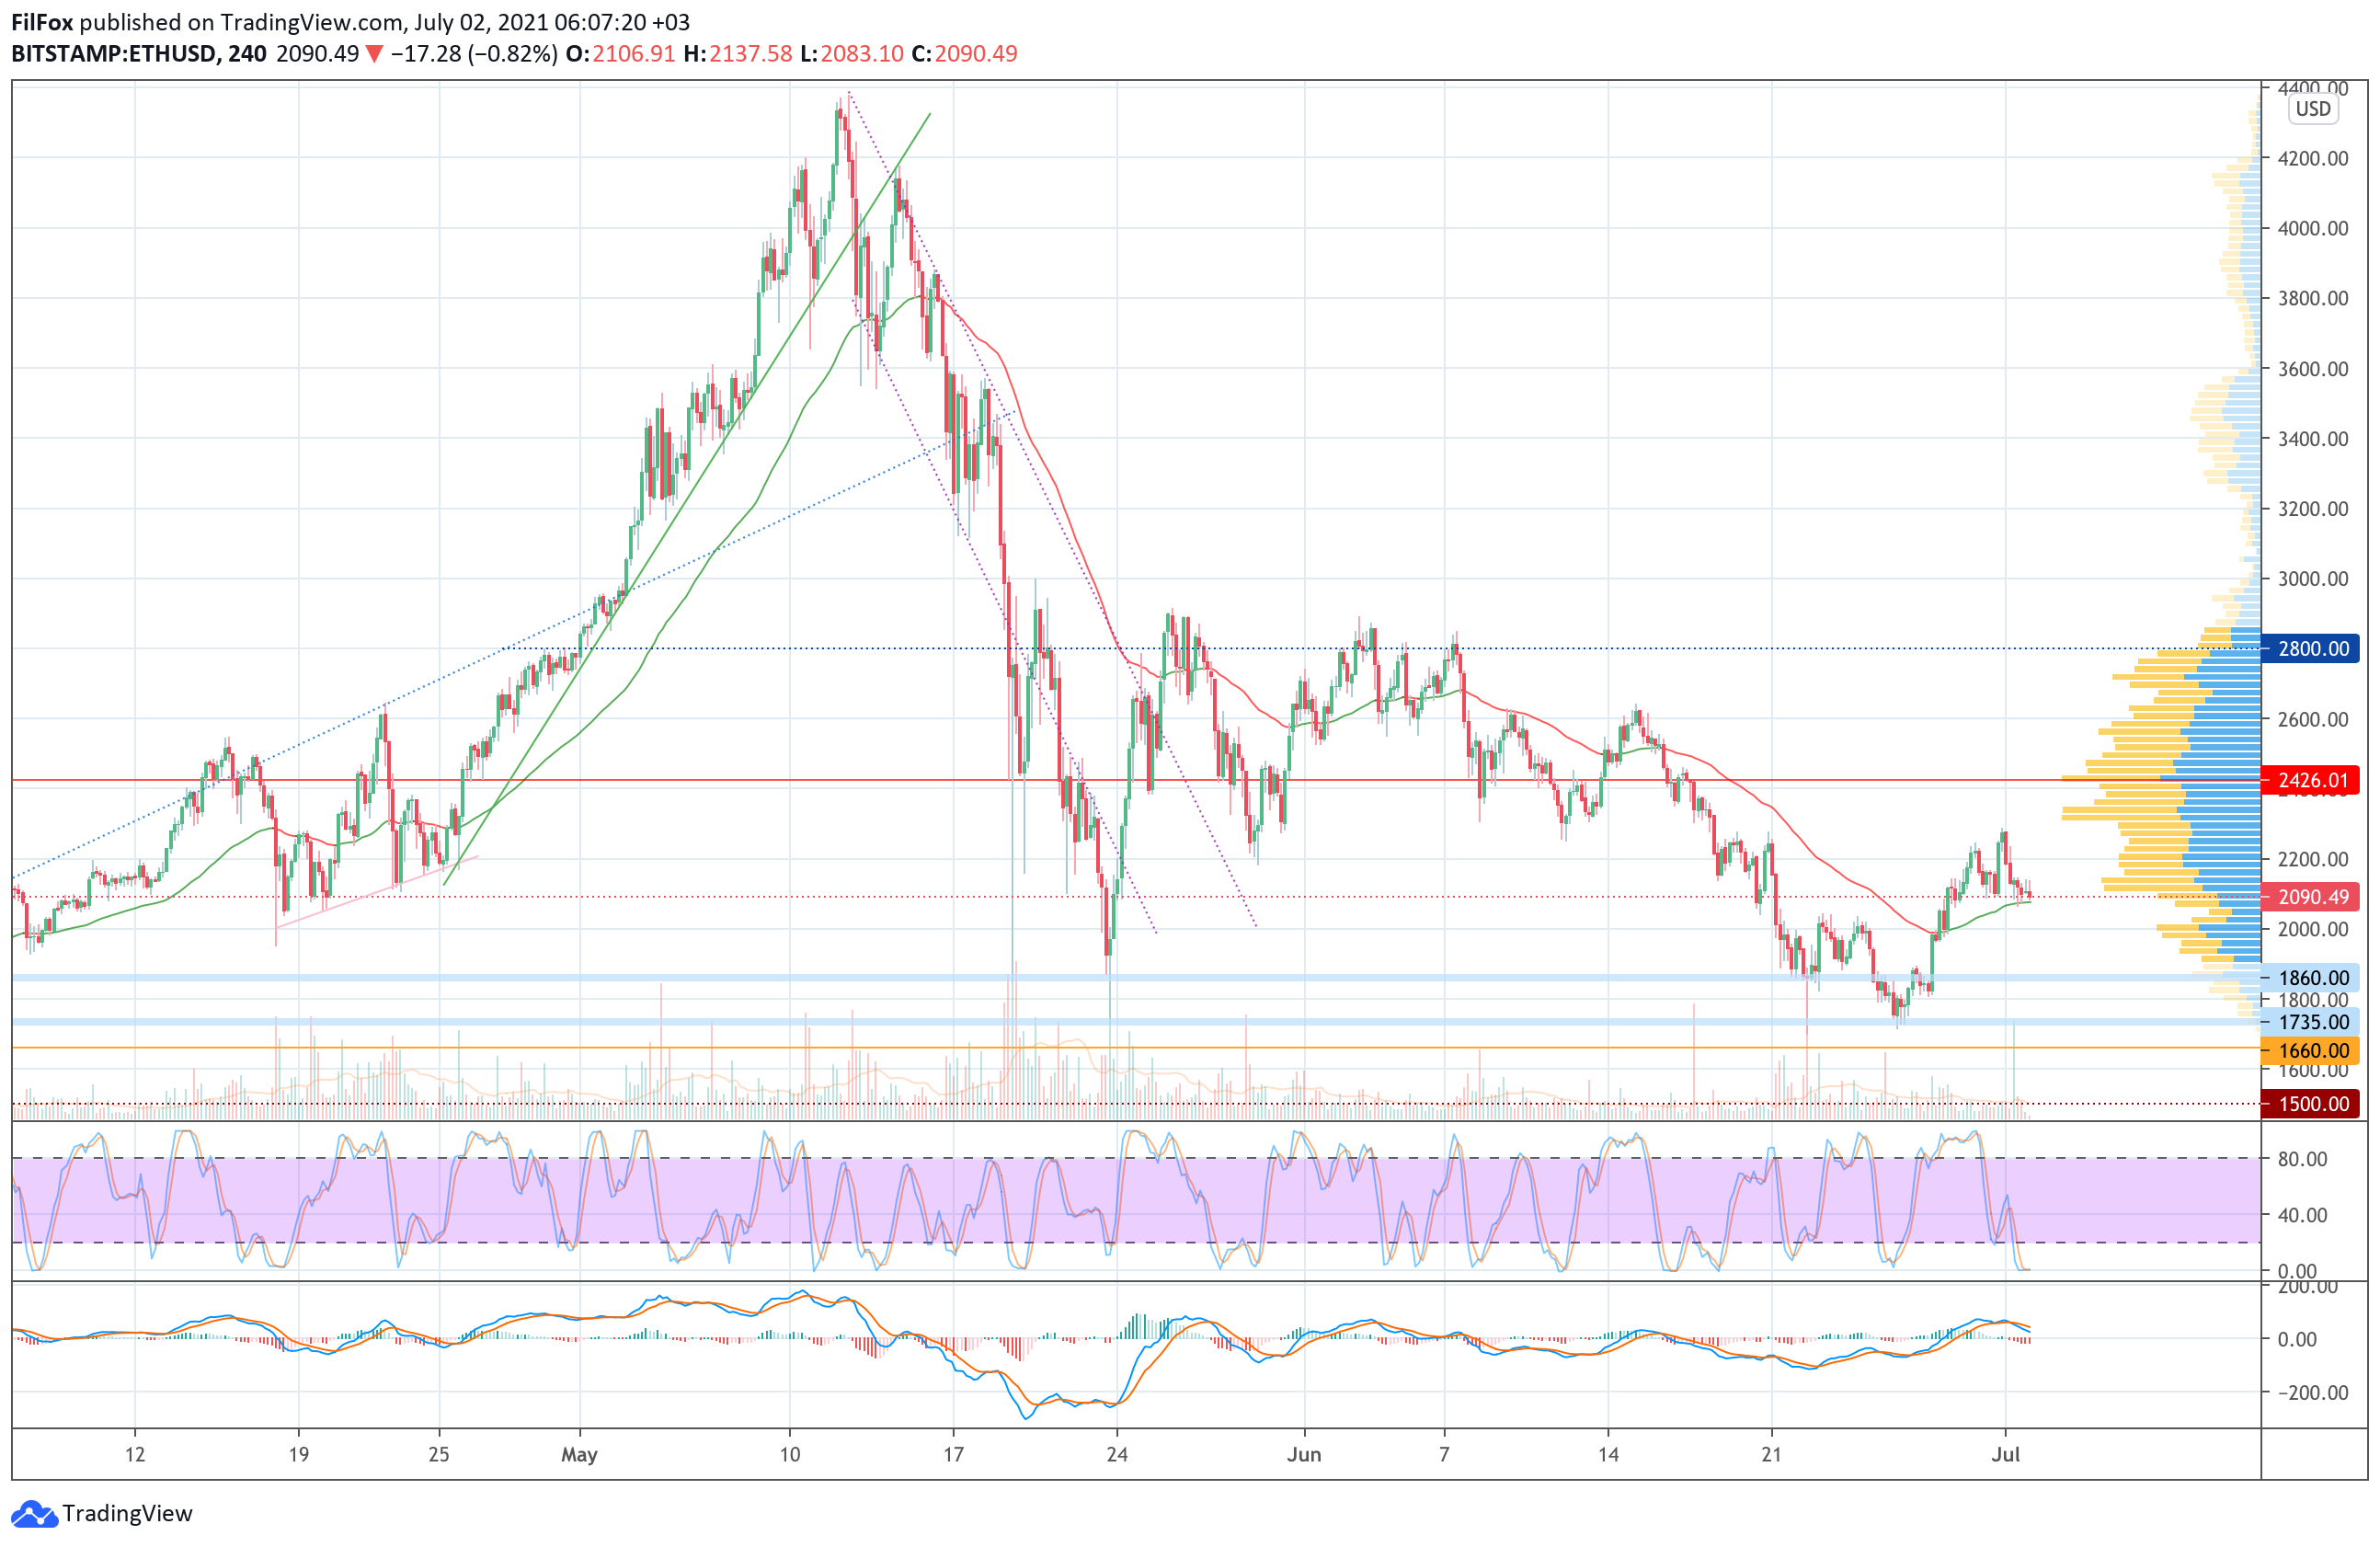 Analysis of prices for Bitcoin, Ethereum, XRP for 07/02/2021